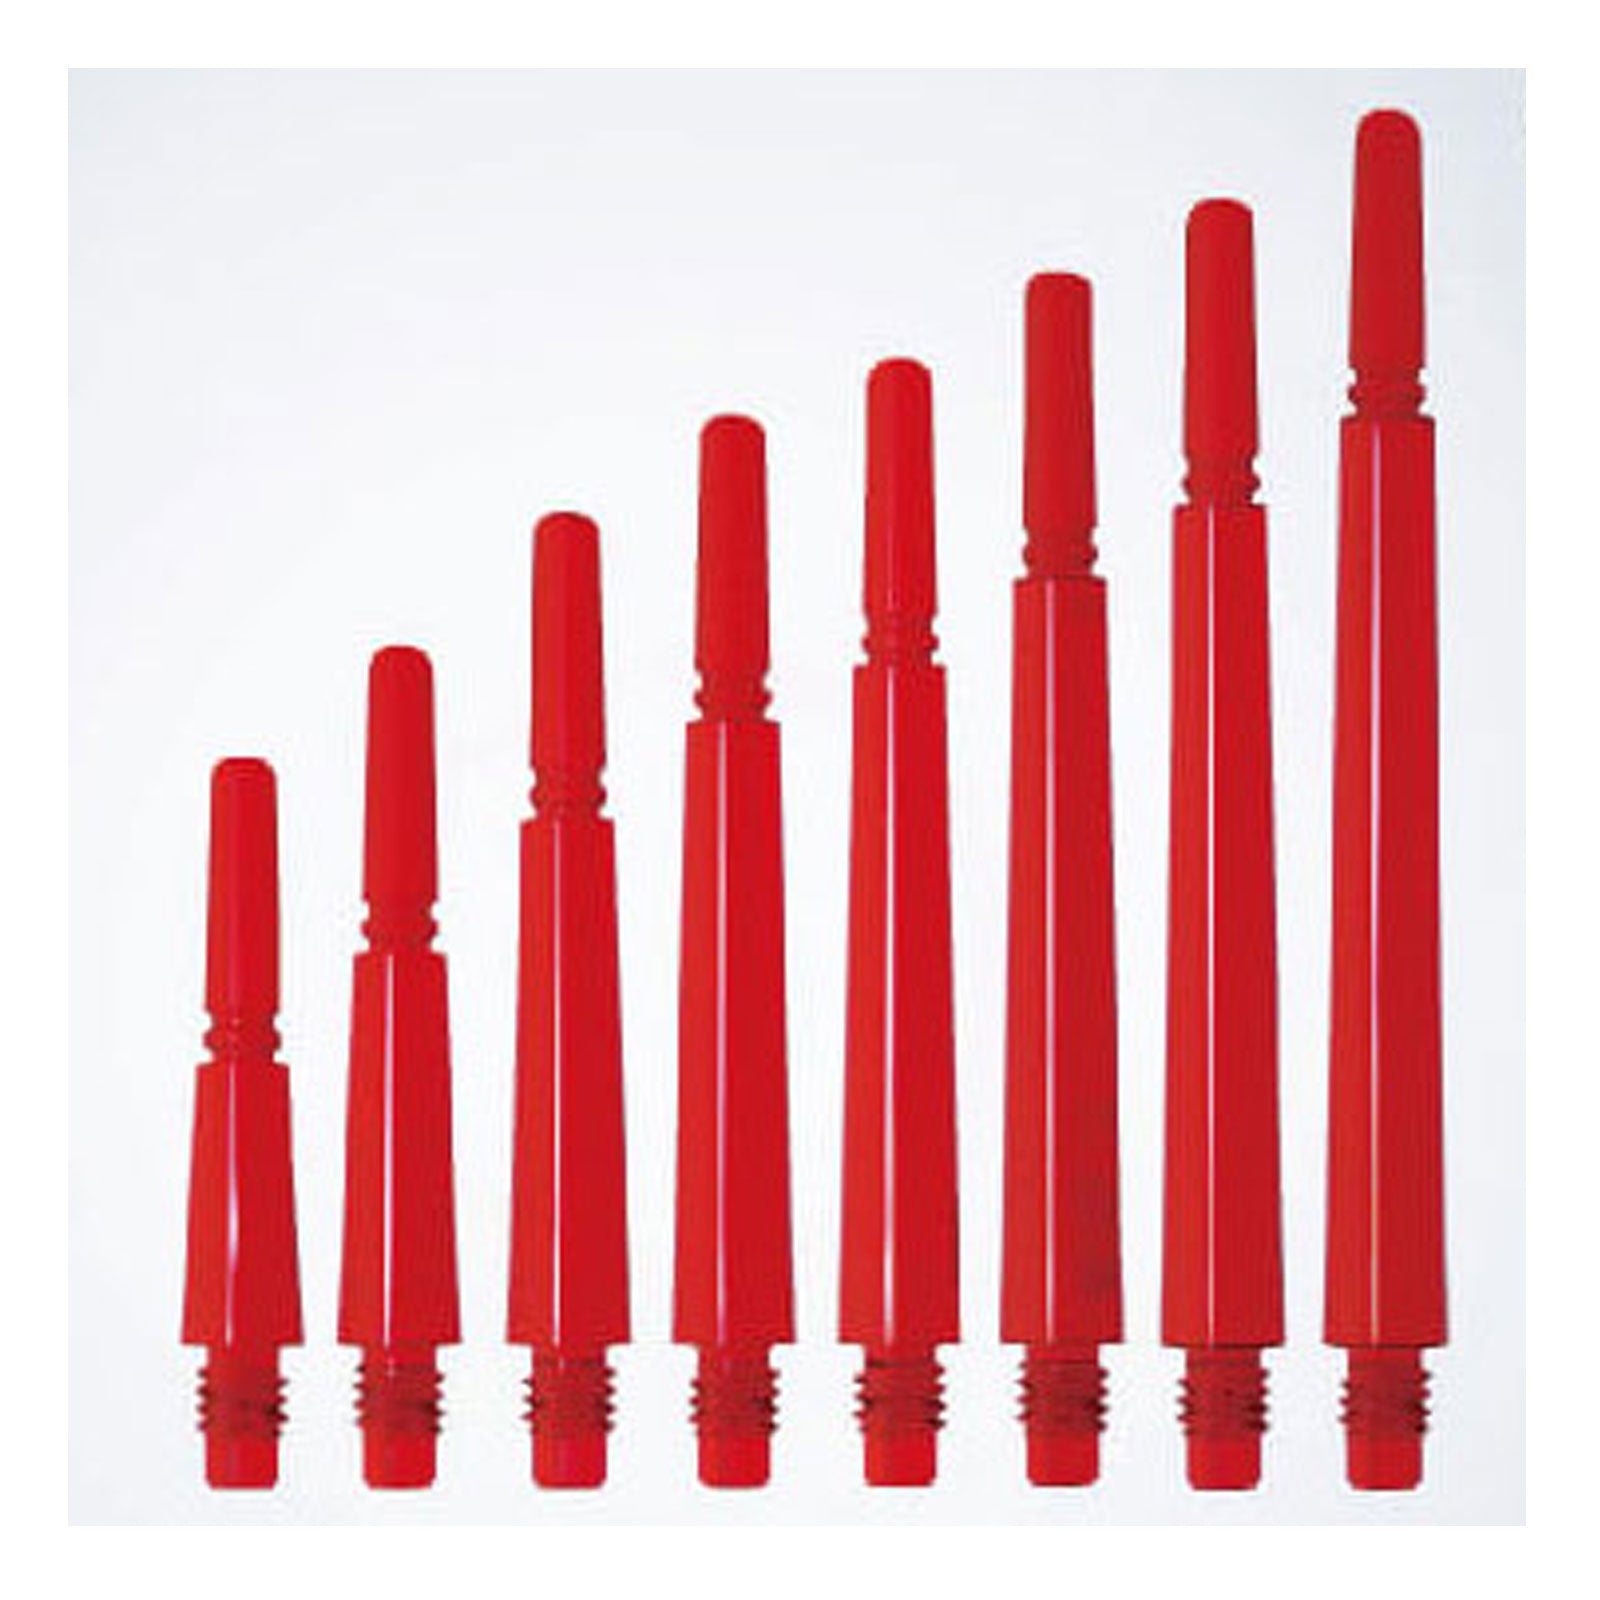 Cosmo Stems -  Normal Spinning Red Shafts - Sizes 1 - 6